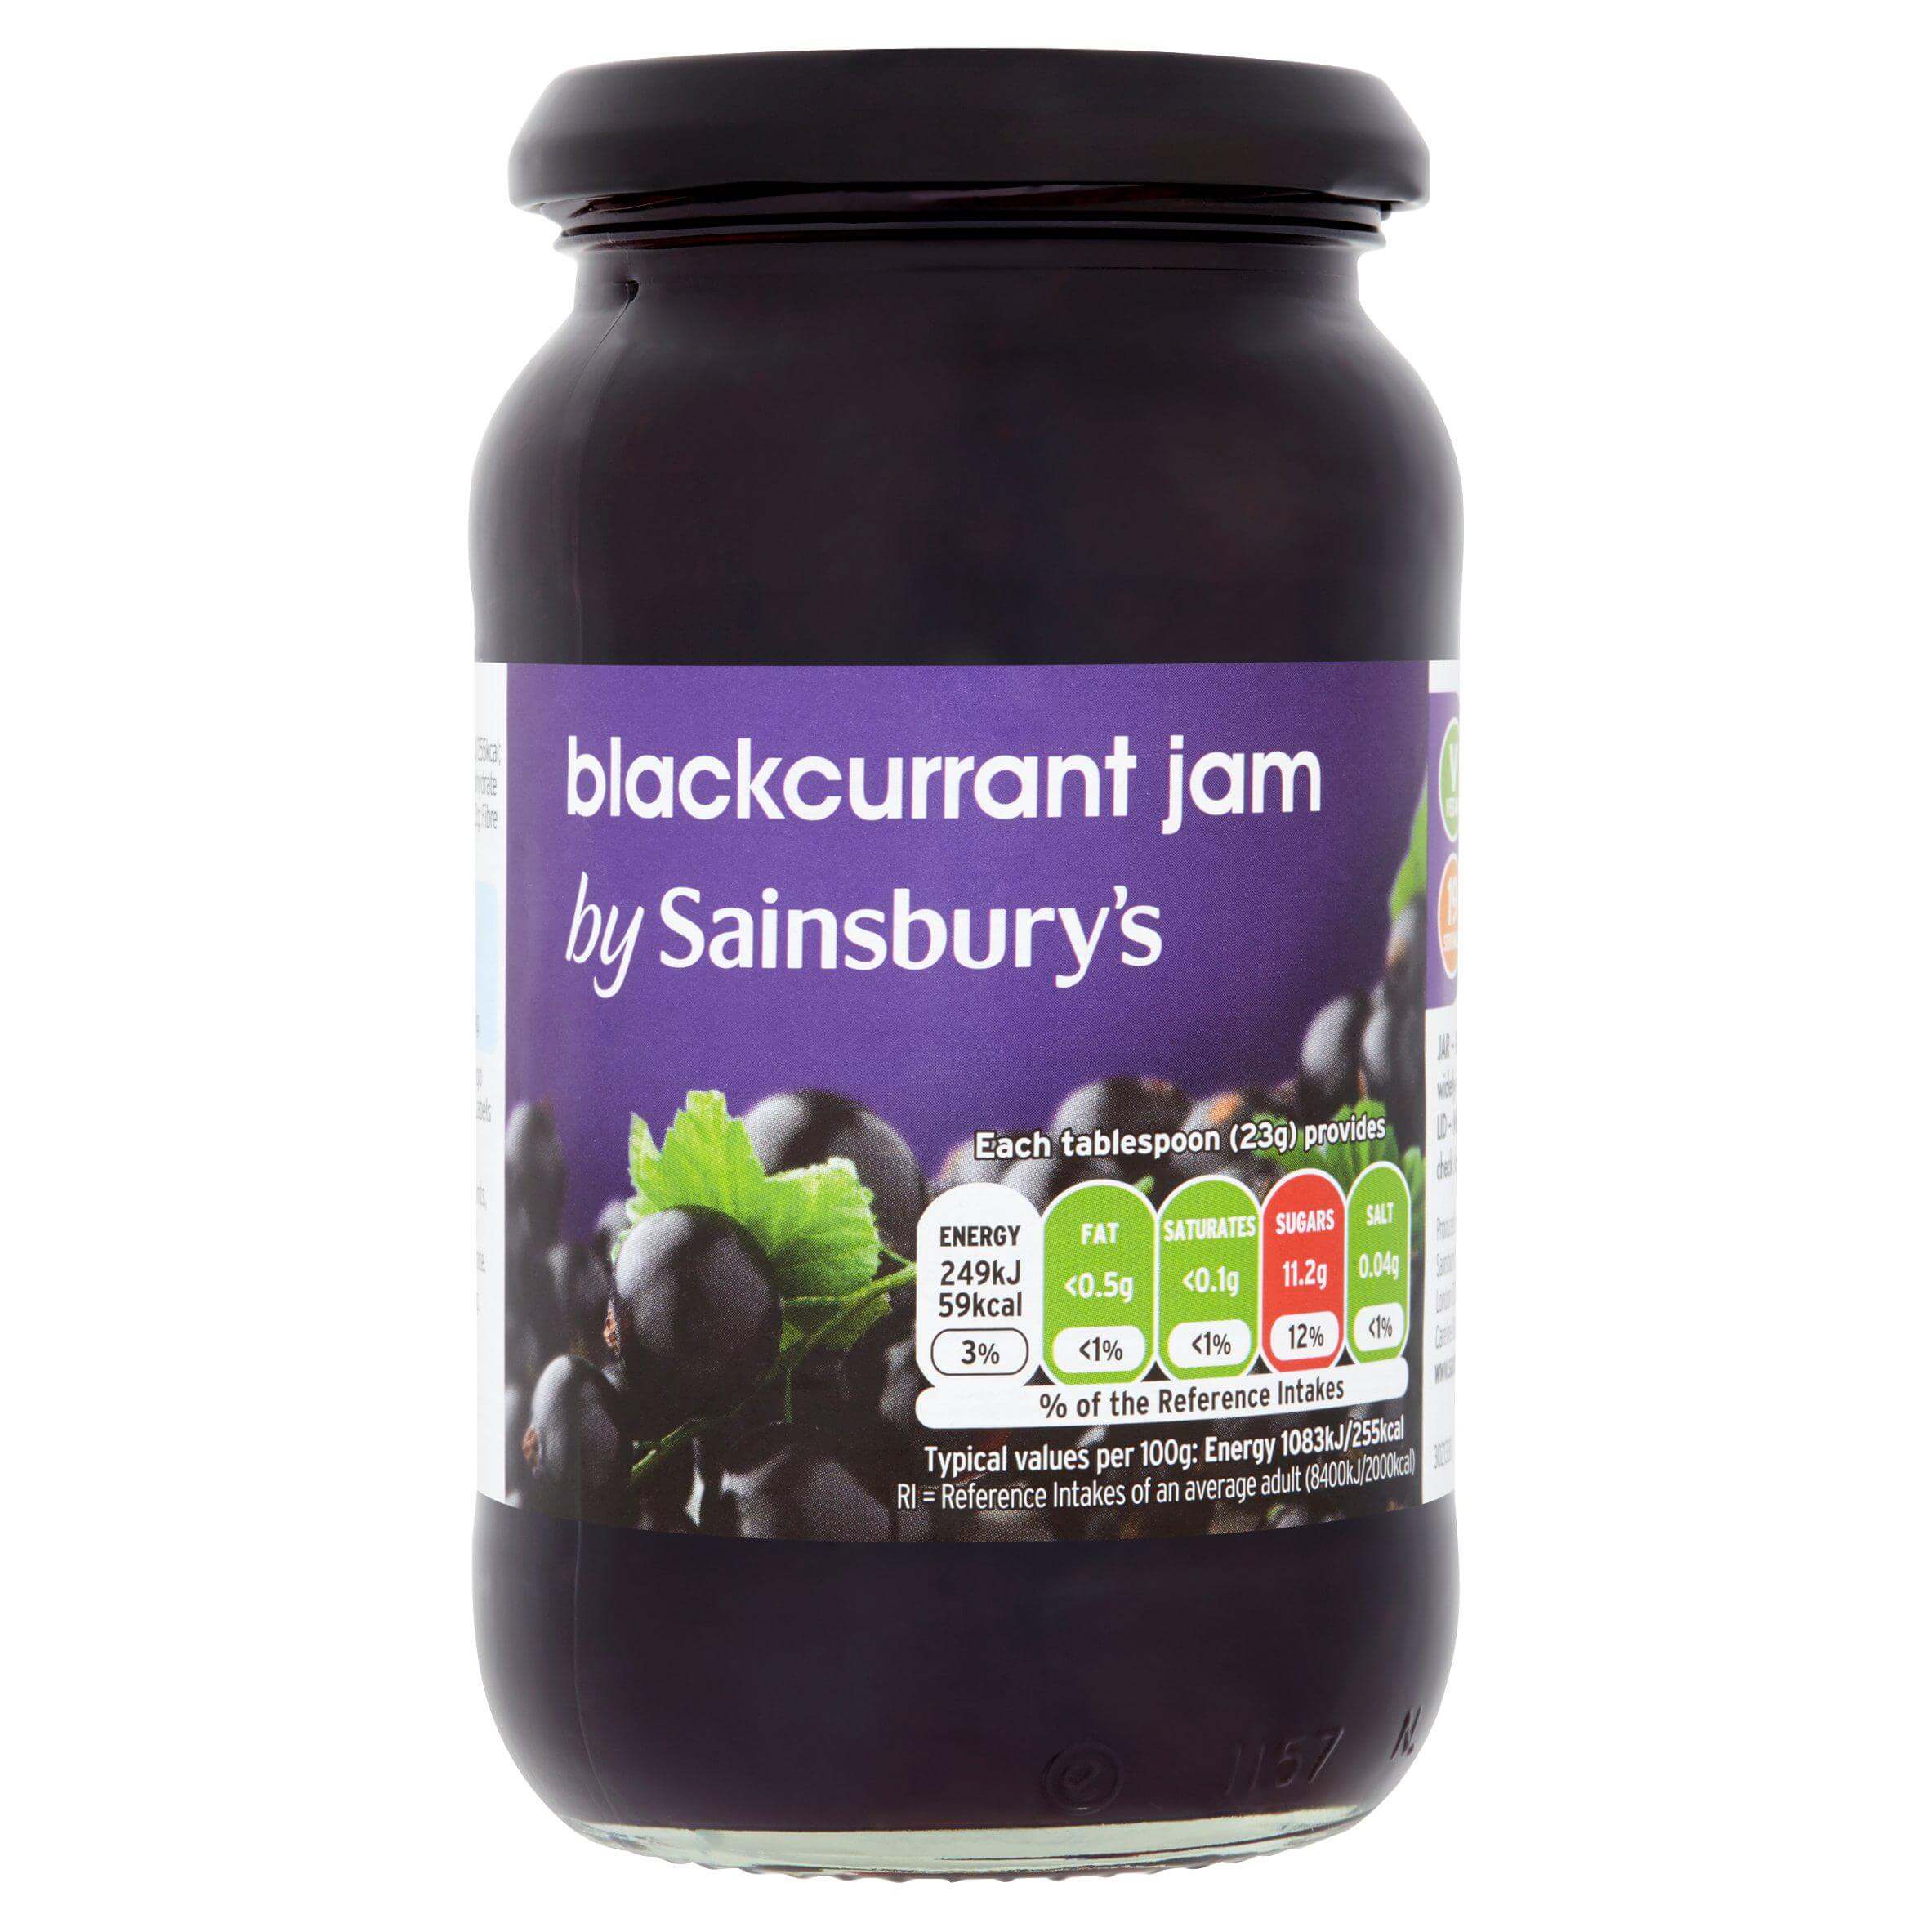 Image of Blackcurrant Jam by Sainsbury's, designed, produced or made in the UK. Buying this product supports a UK business, jobs and the local community.